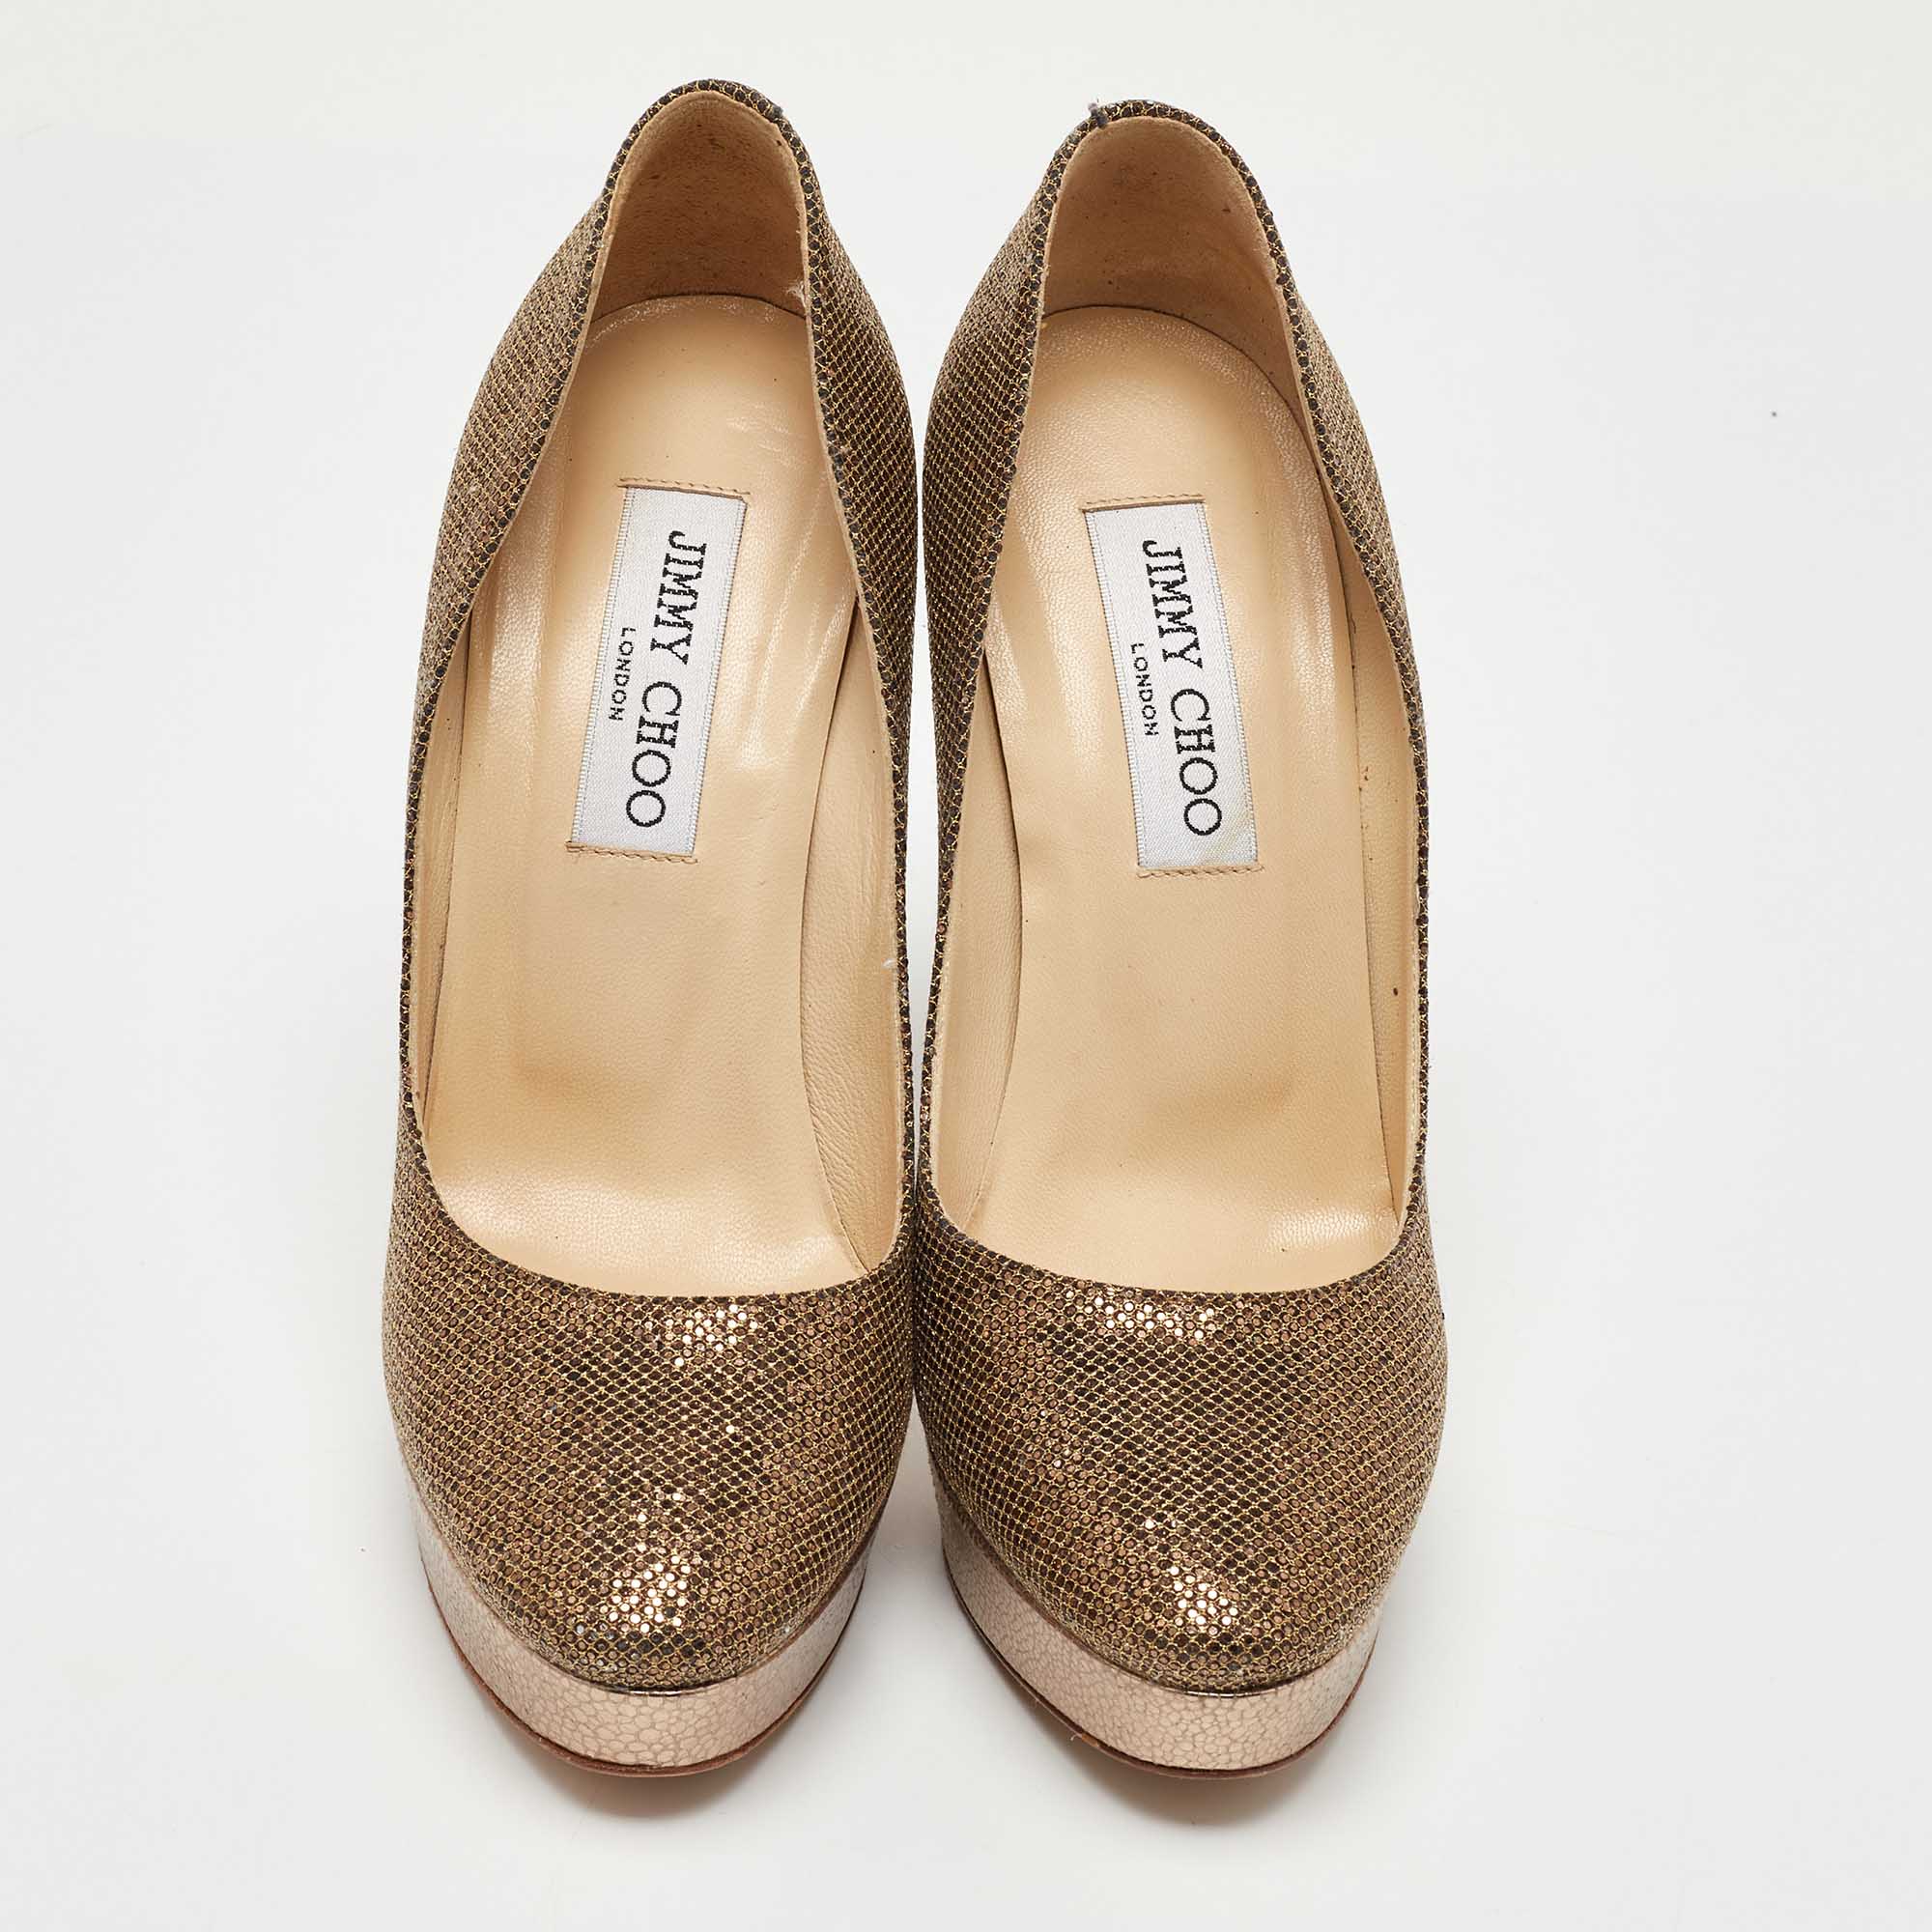 Jimmy Choo Gold Glitter And Leather Cosmic Platform Pumps Size 37.5